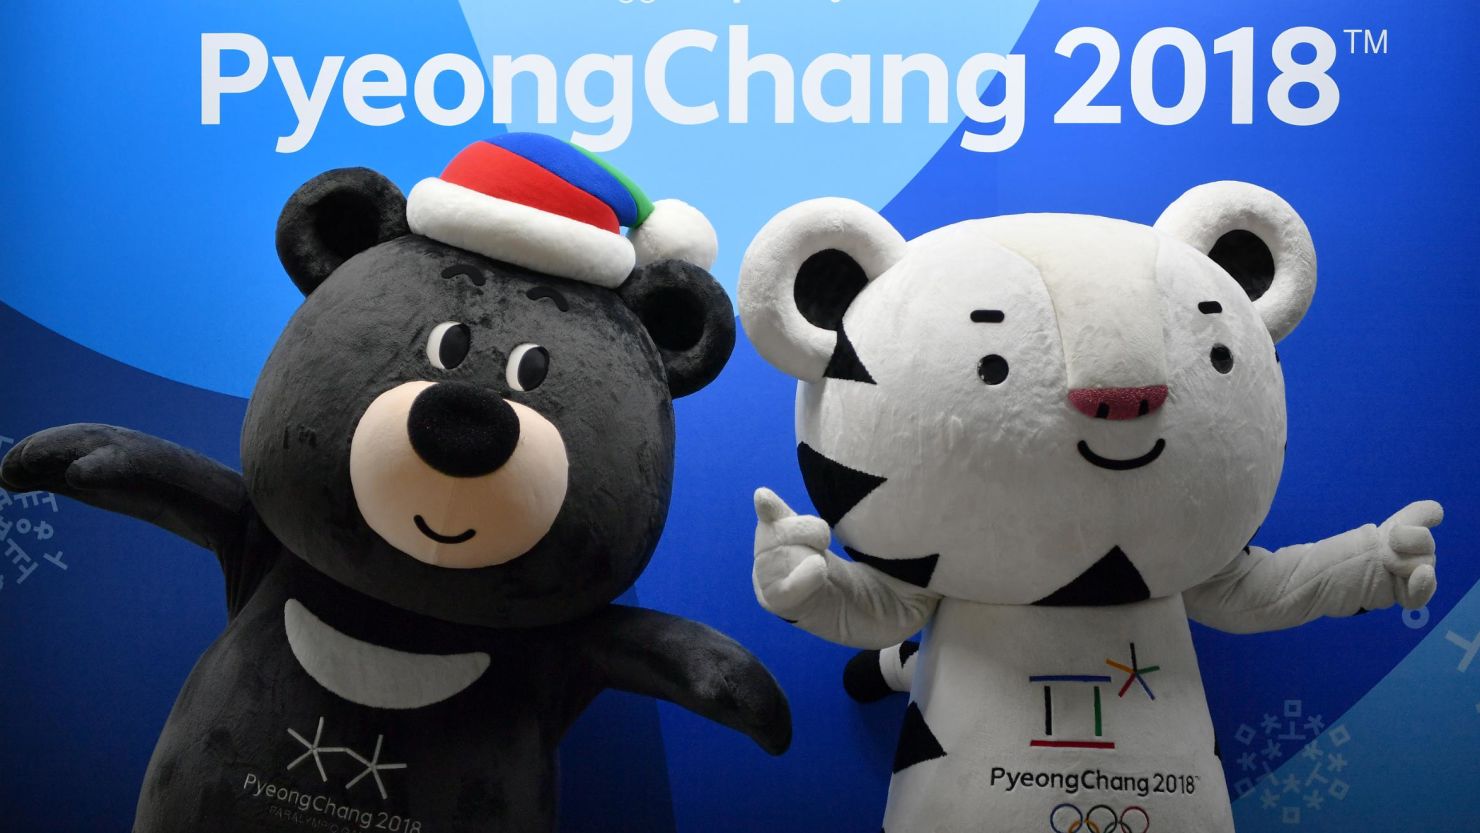 LONDON, ENGLAND - JANUARY 09:  Paralympic Mascot Bandabi (L) poses alongside Olympic Mascot Soohorang during the UK Sport Medal Target Announcement for Pyeongchang 2018 Winter Olympic and Paralympic Games at the Korean Cultural Centre on January 9, 2018 in London, England. (Photo by Dan Mullan/Getty Images)